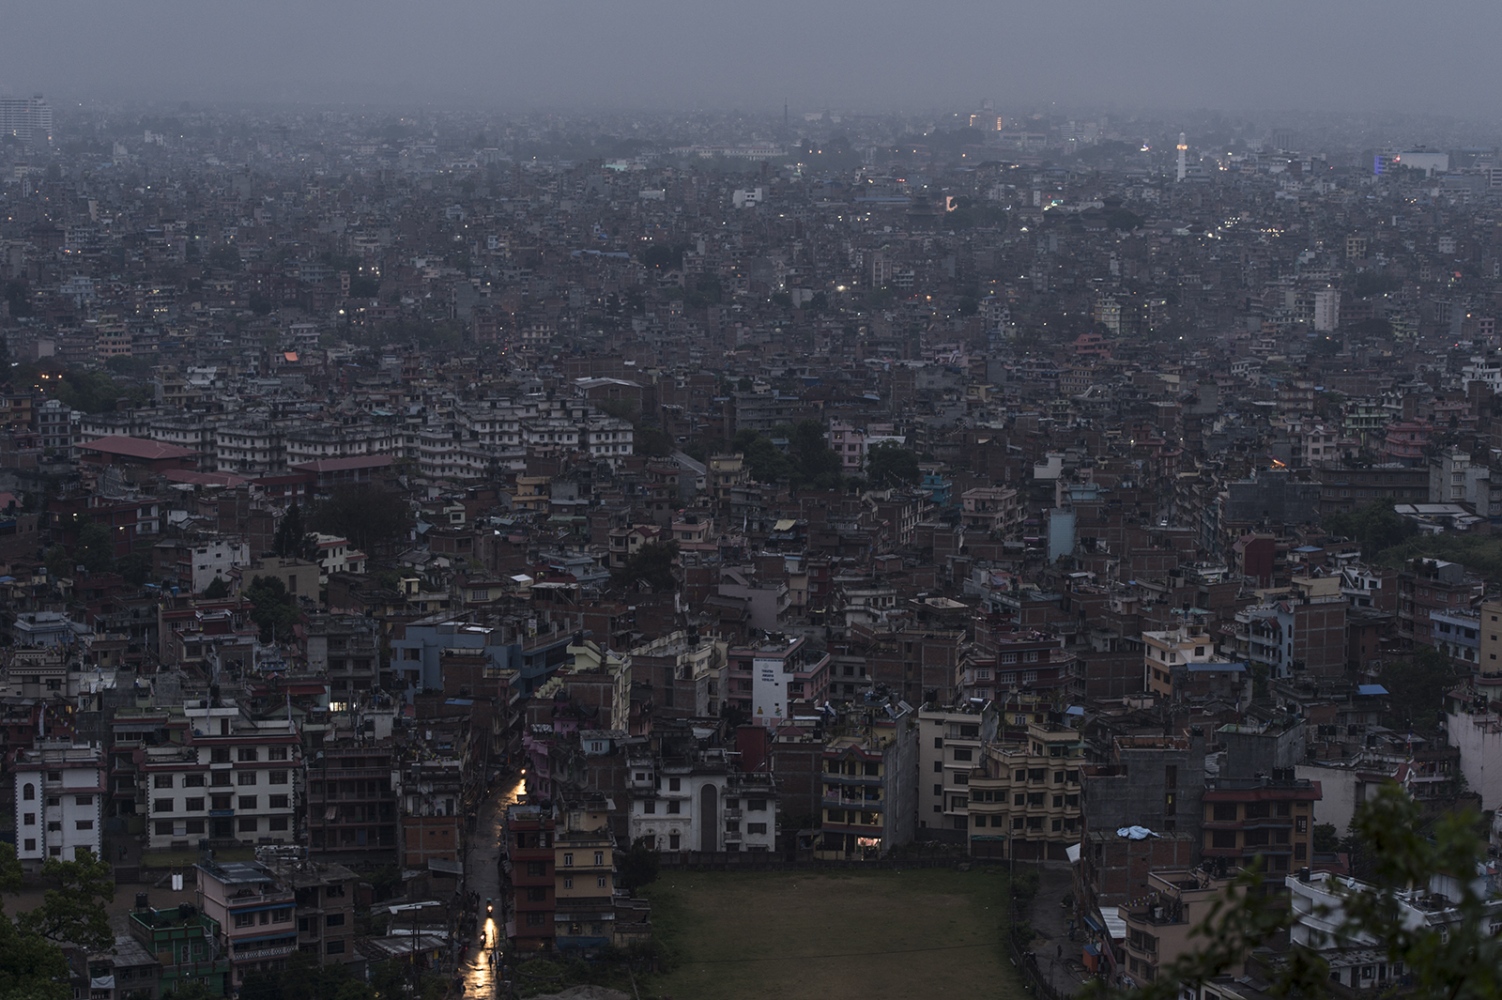  An overview over Kathmandu before sunset shows small, fragmented rays of light in the windows. Restricted use of electricity in the city is...